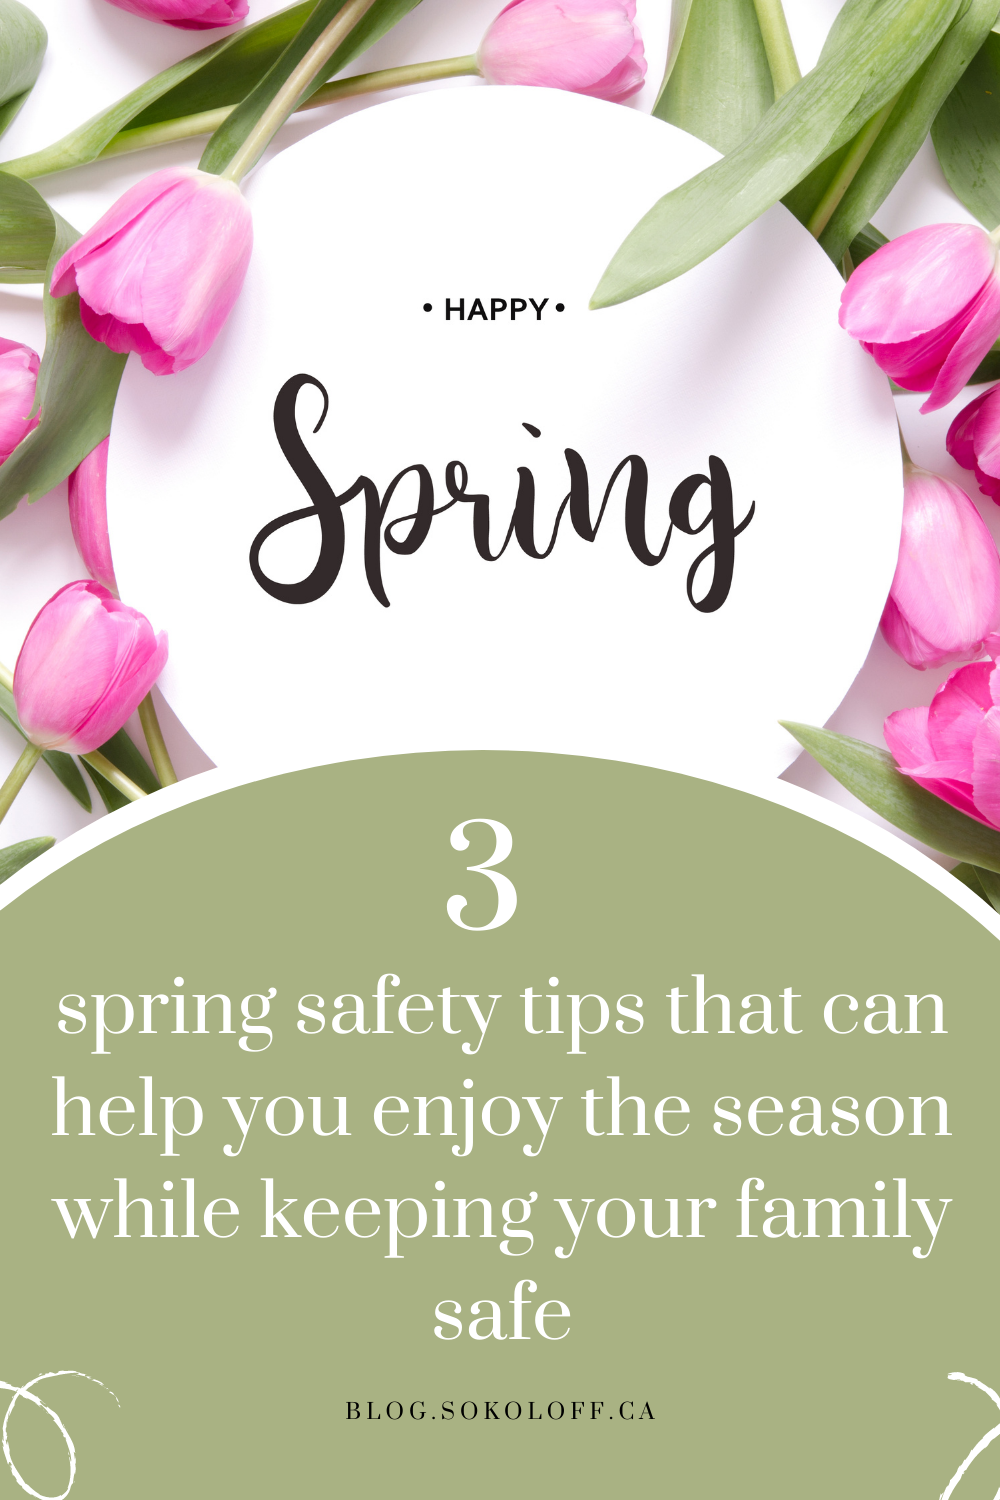 Spring Safety Tips for Home and Vehicle